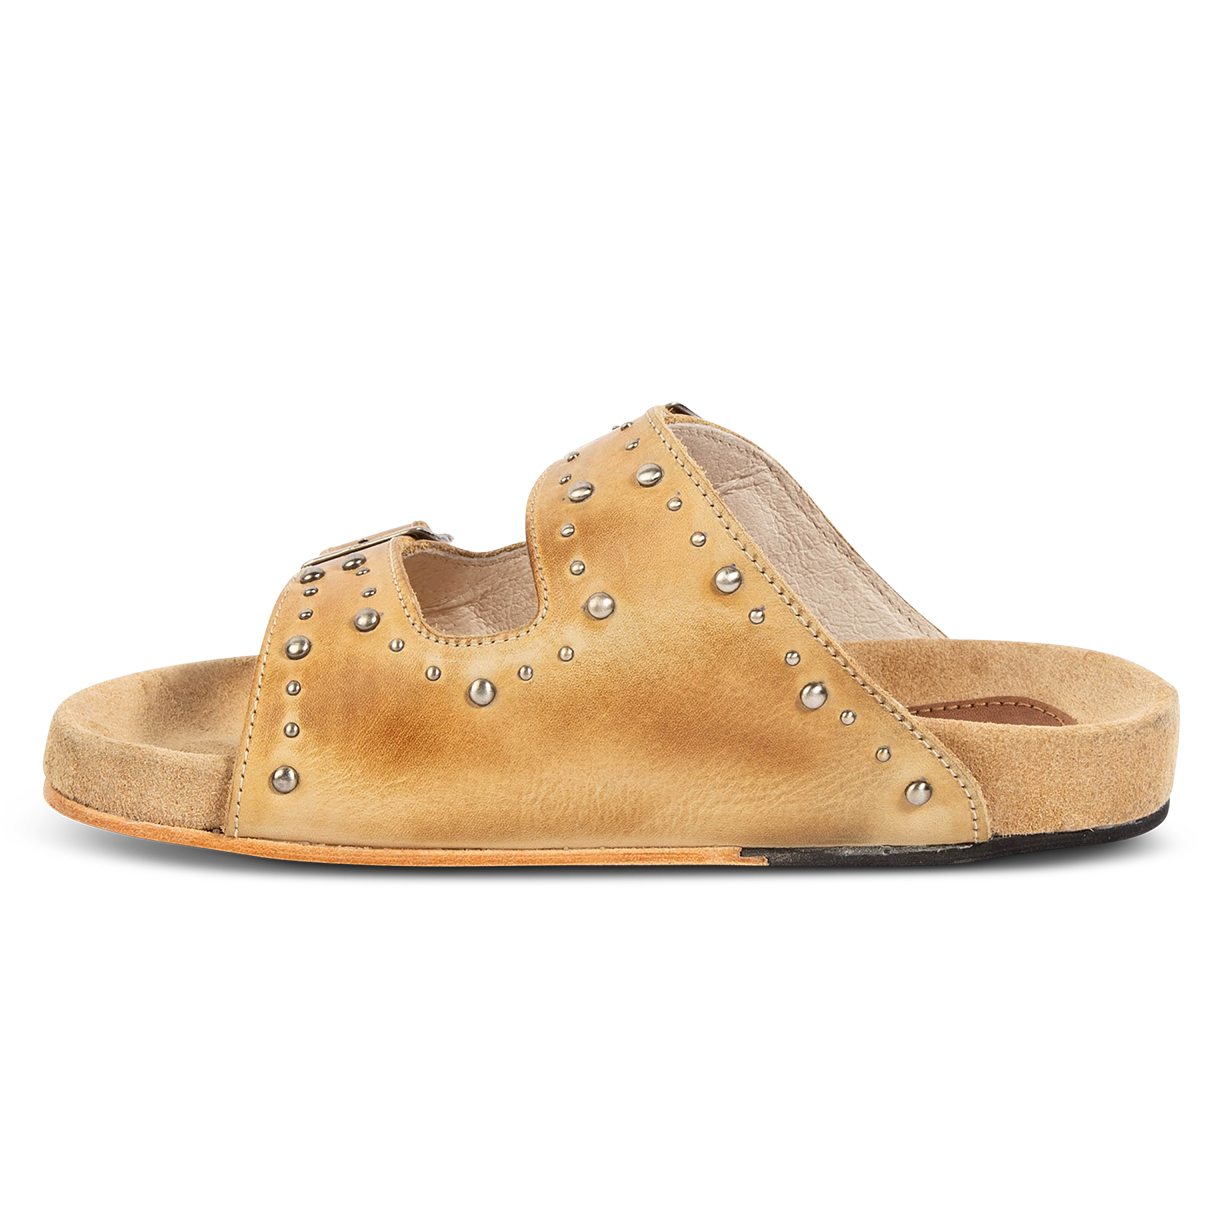 Inside view showing FREEBIRD women's Asher natural sandal with adjustable belt buckles, a suede footbed and silver embellishments